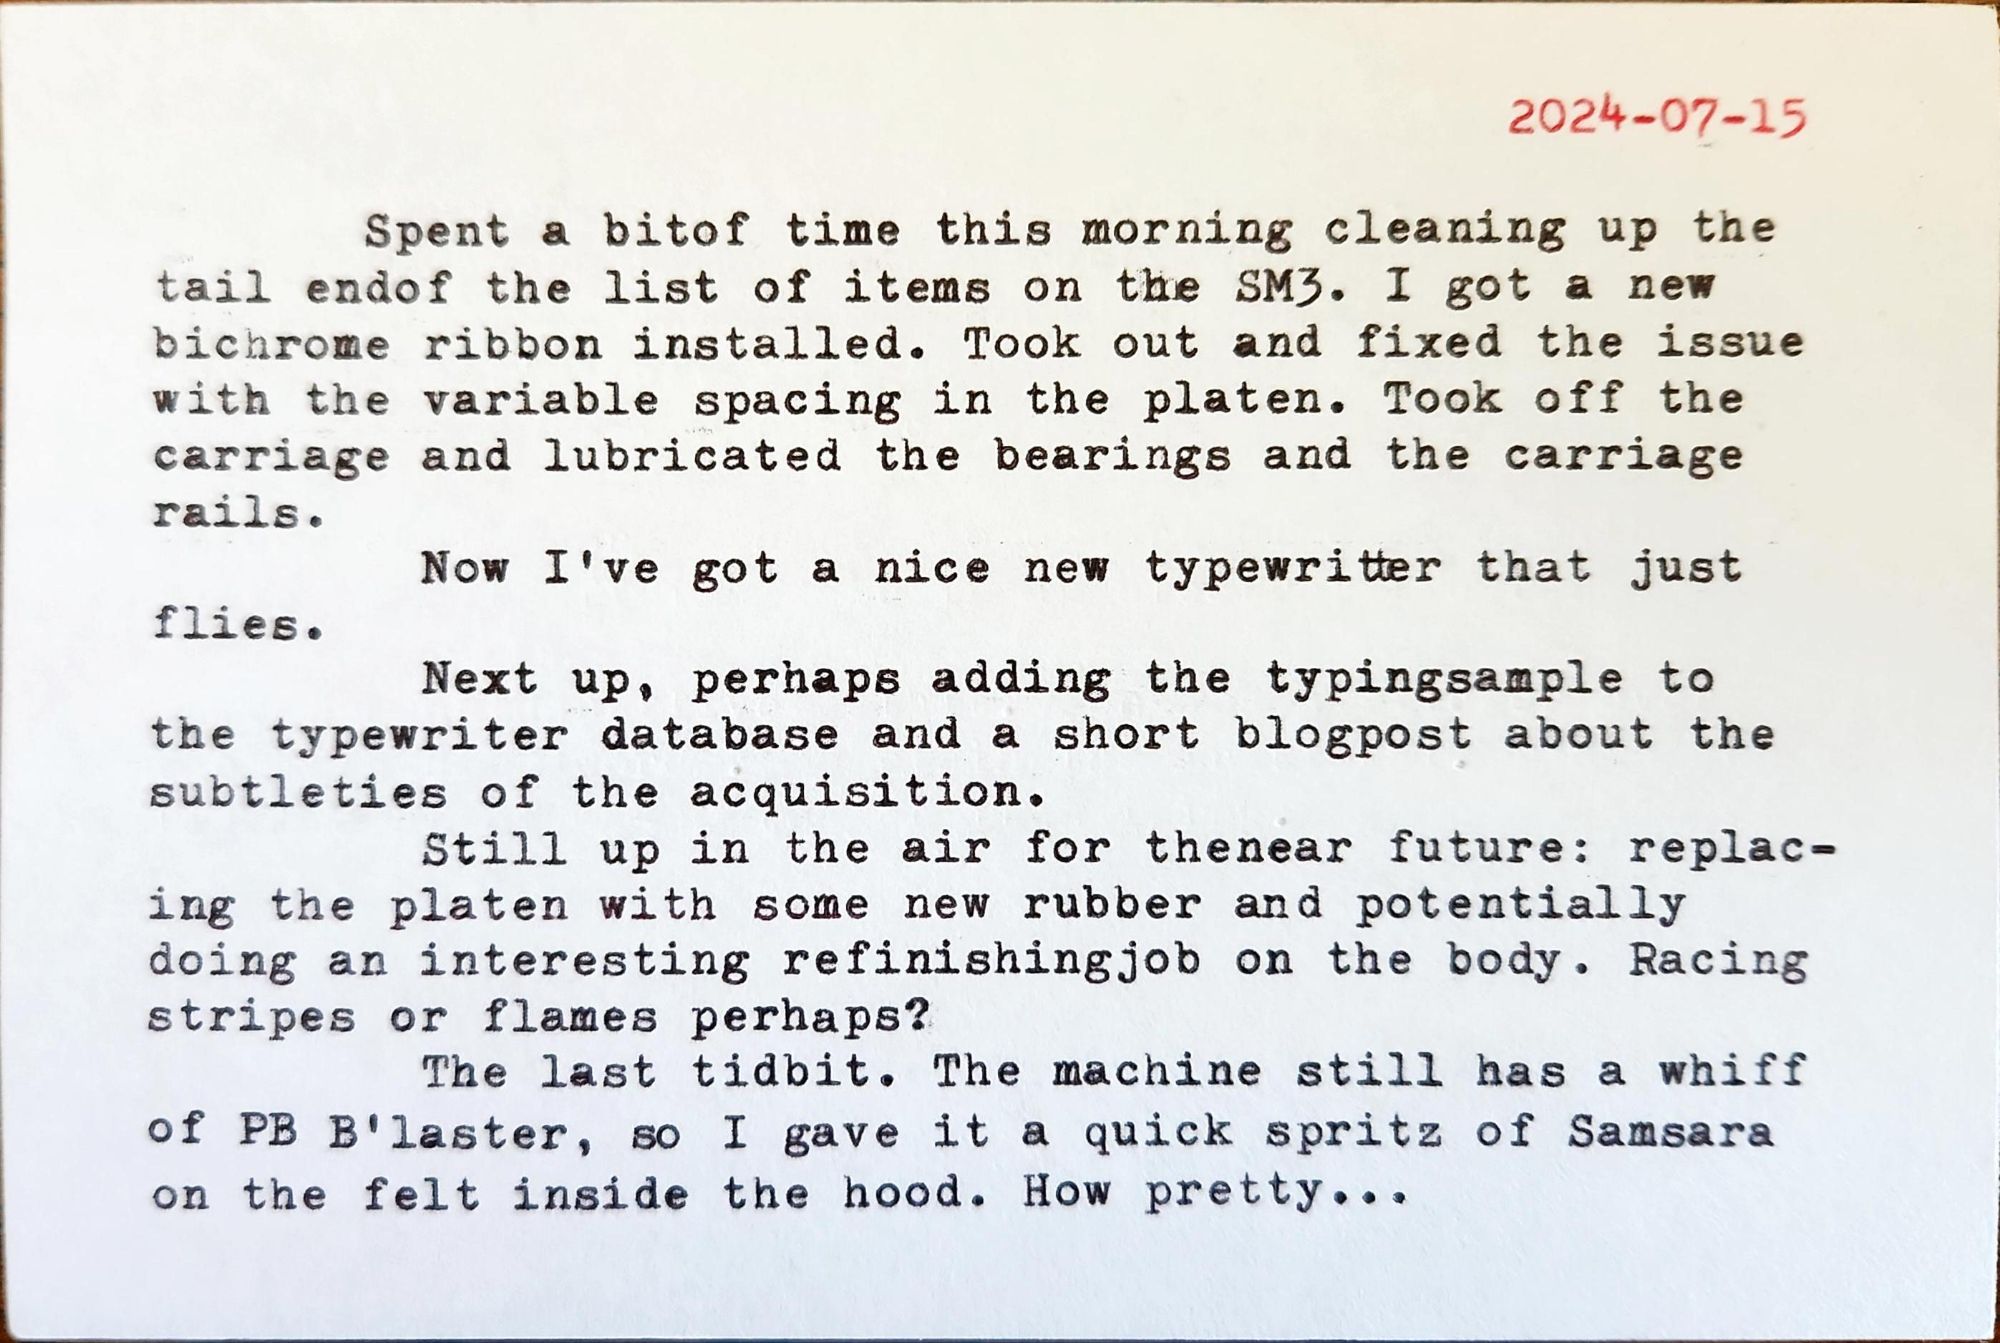 Typed white index card in elite typeface that reads: 2024-07-15 Spent a bit of time this morning cleaning up the tail end of the list of items on the SM3. I got a new bichrome ribbon installed. Took out and fixed the issue with the variable spacing in the platen. Took off the carriage and lubricated the bearings and the carriage rails. Now I've got a nice new typewriter that just flies. Next up, perhaps adding the typing sample to the typewriter database and a short blogpost about the subtleties of the acquisition. Still up in the air for the near future: replac- ing the platen with some new rubber and potentially doing an interesting refinishing job on the body. Racing stripes or flames perhaps? The last tidbit. The machine still has a whiff of PB B'laster, so I gave it a quick spritz of Samsara on the felt inside the hood. How pretty...